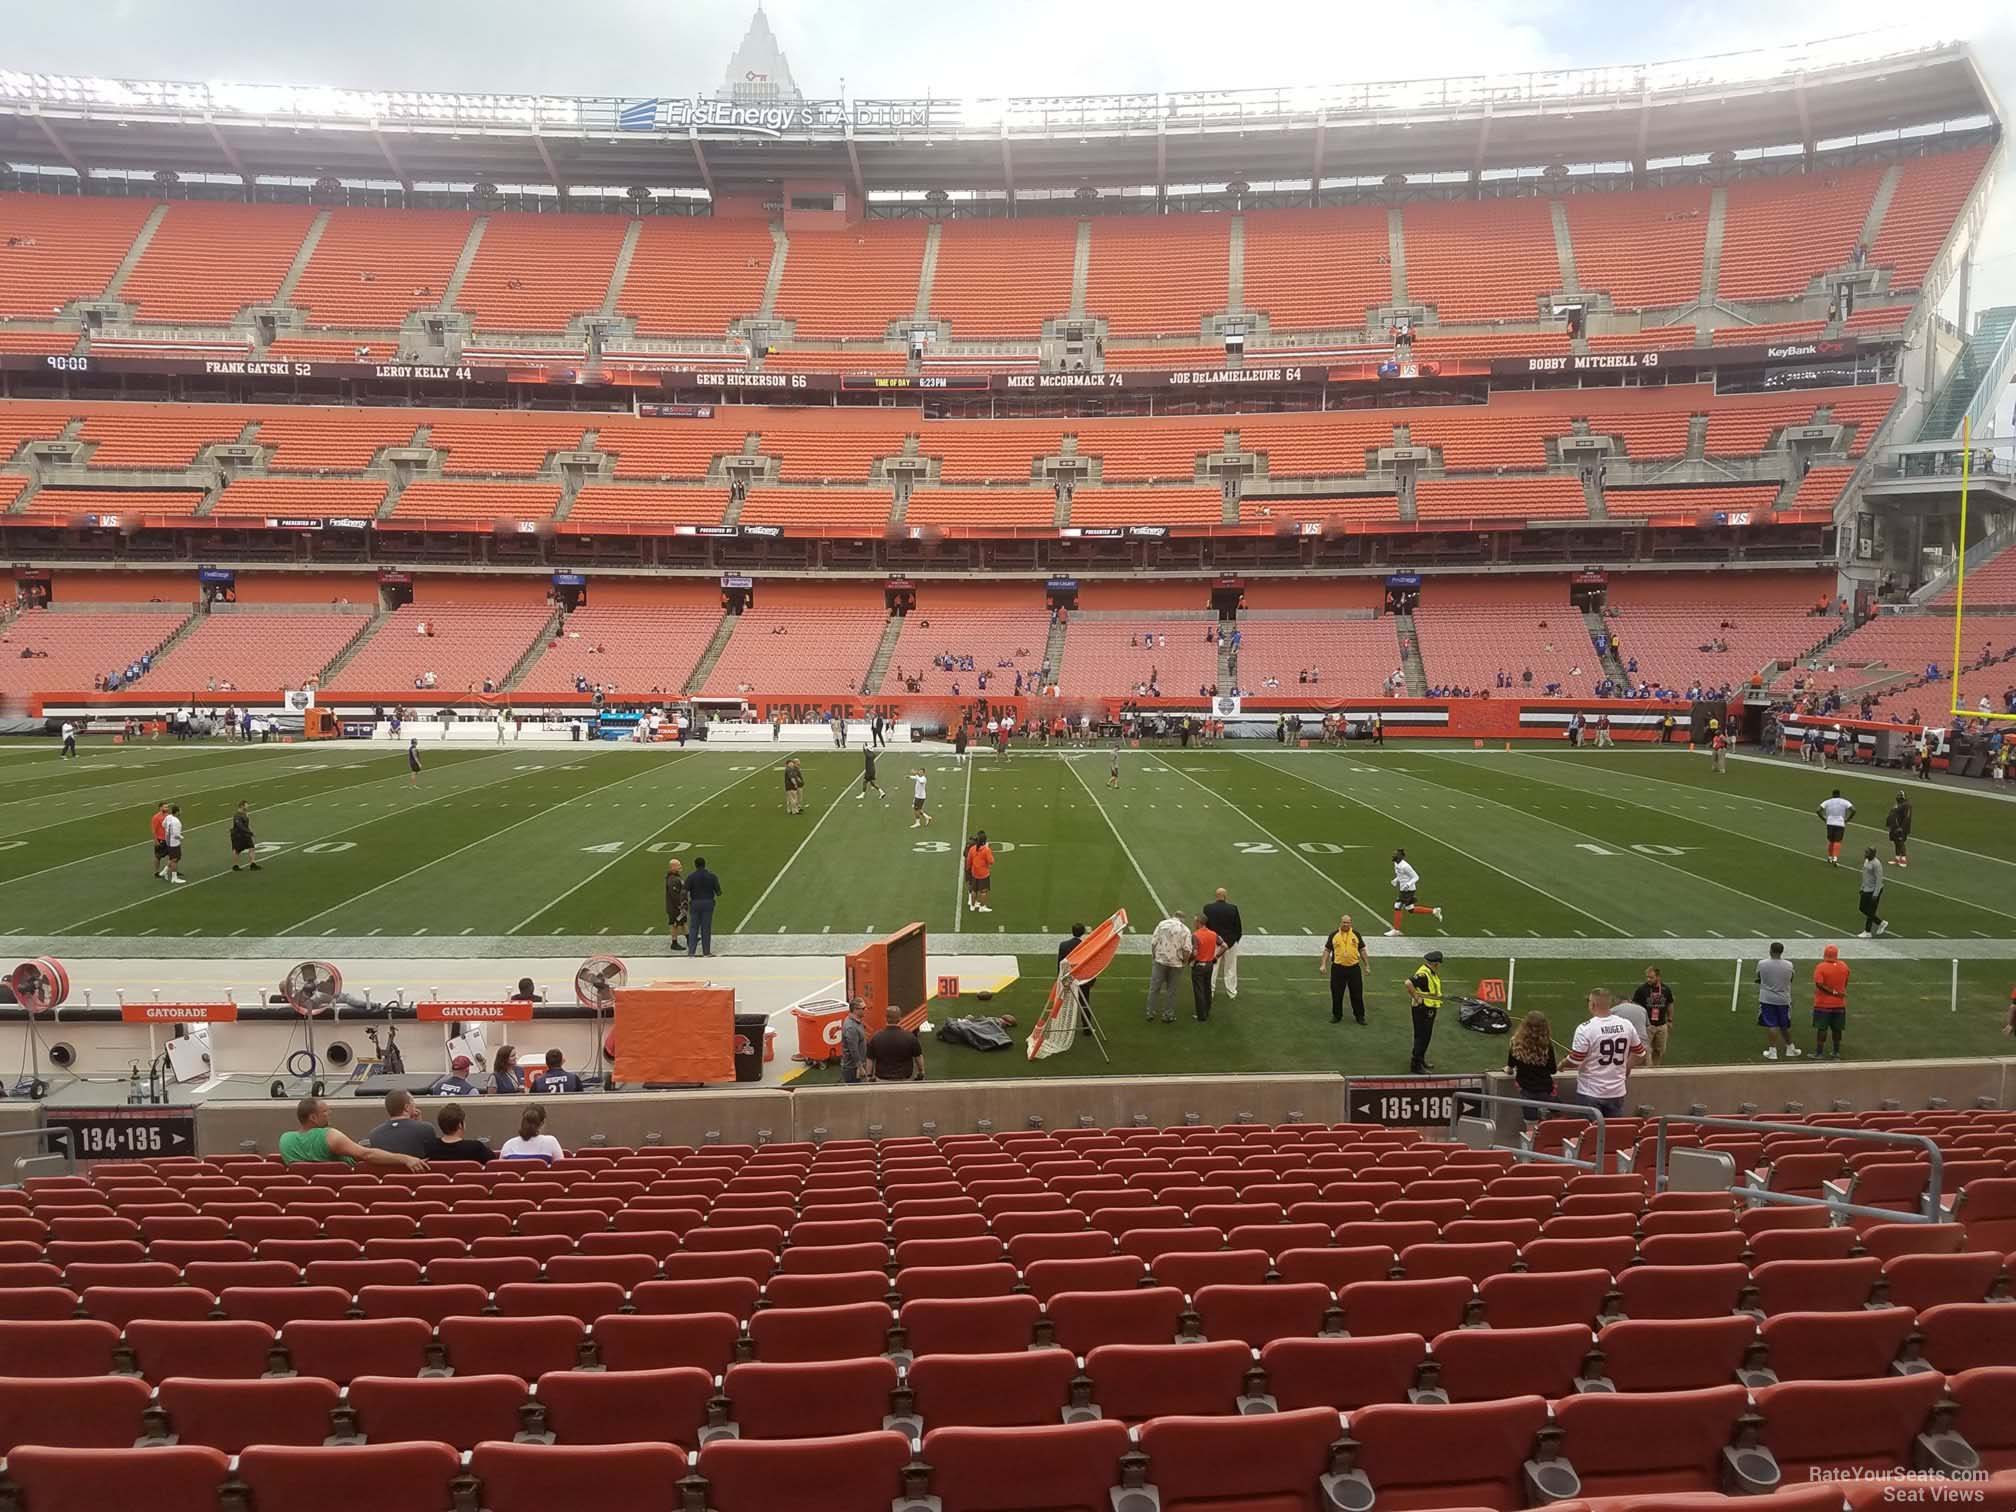 section 135, row 17 seat view  - cleveland browns stadium